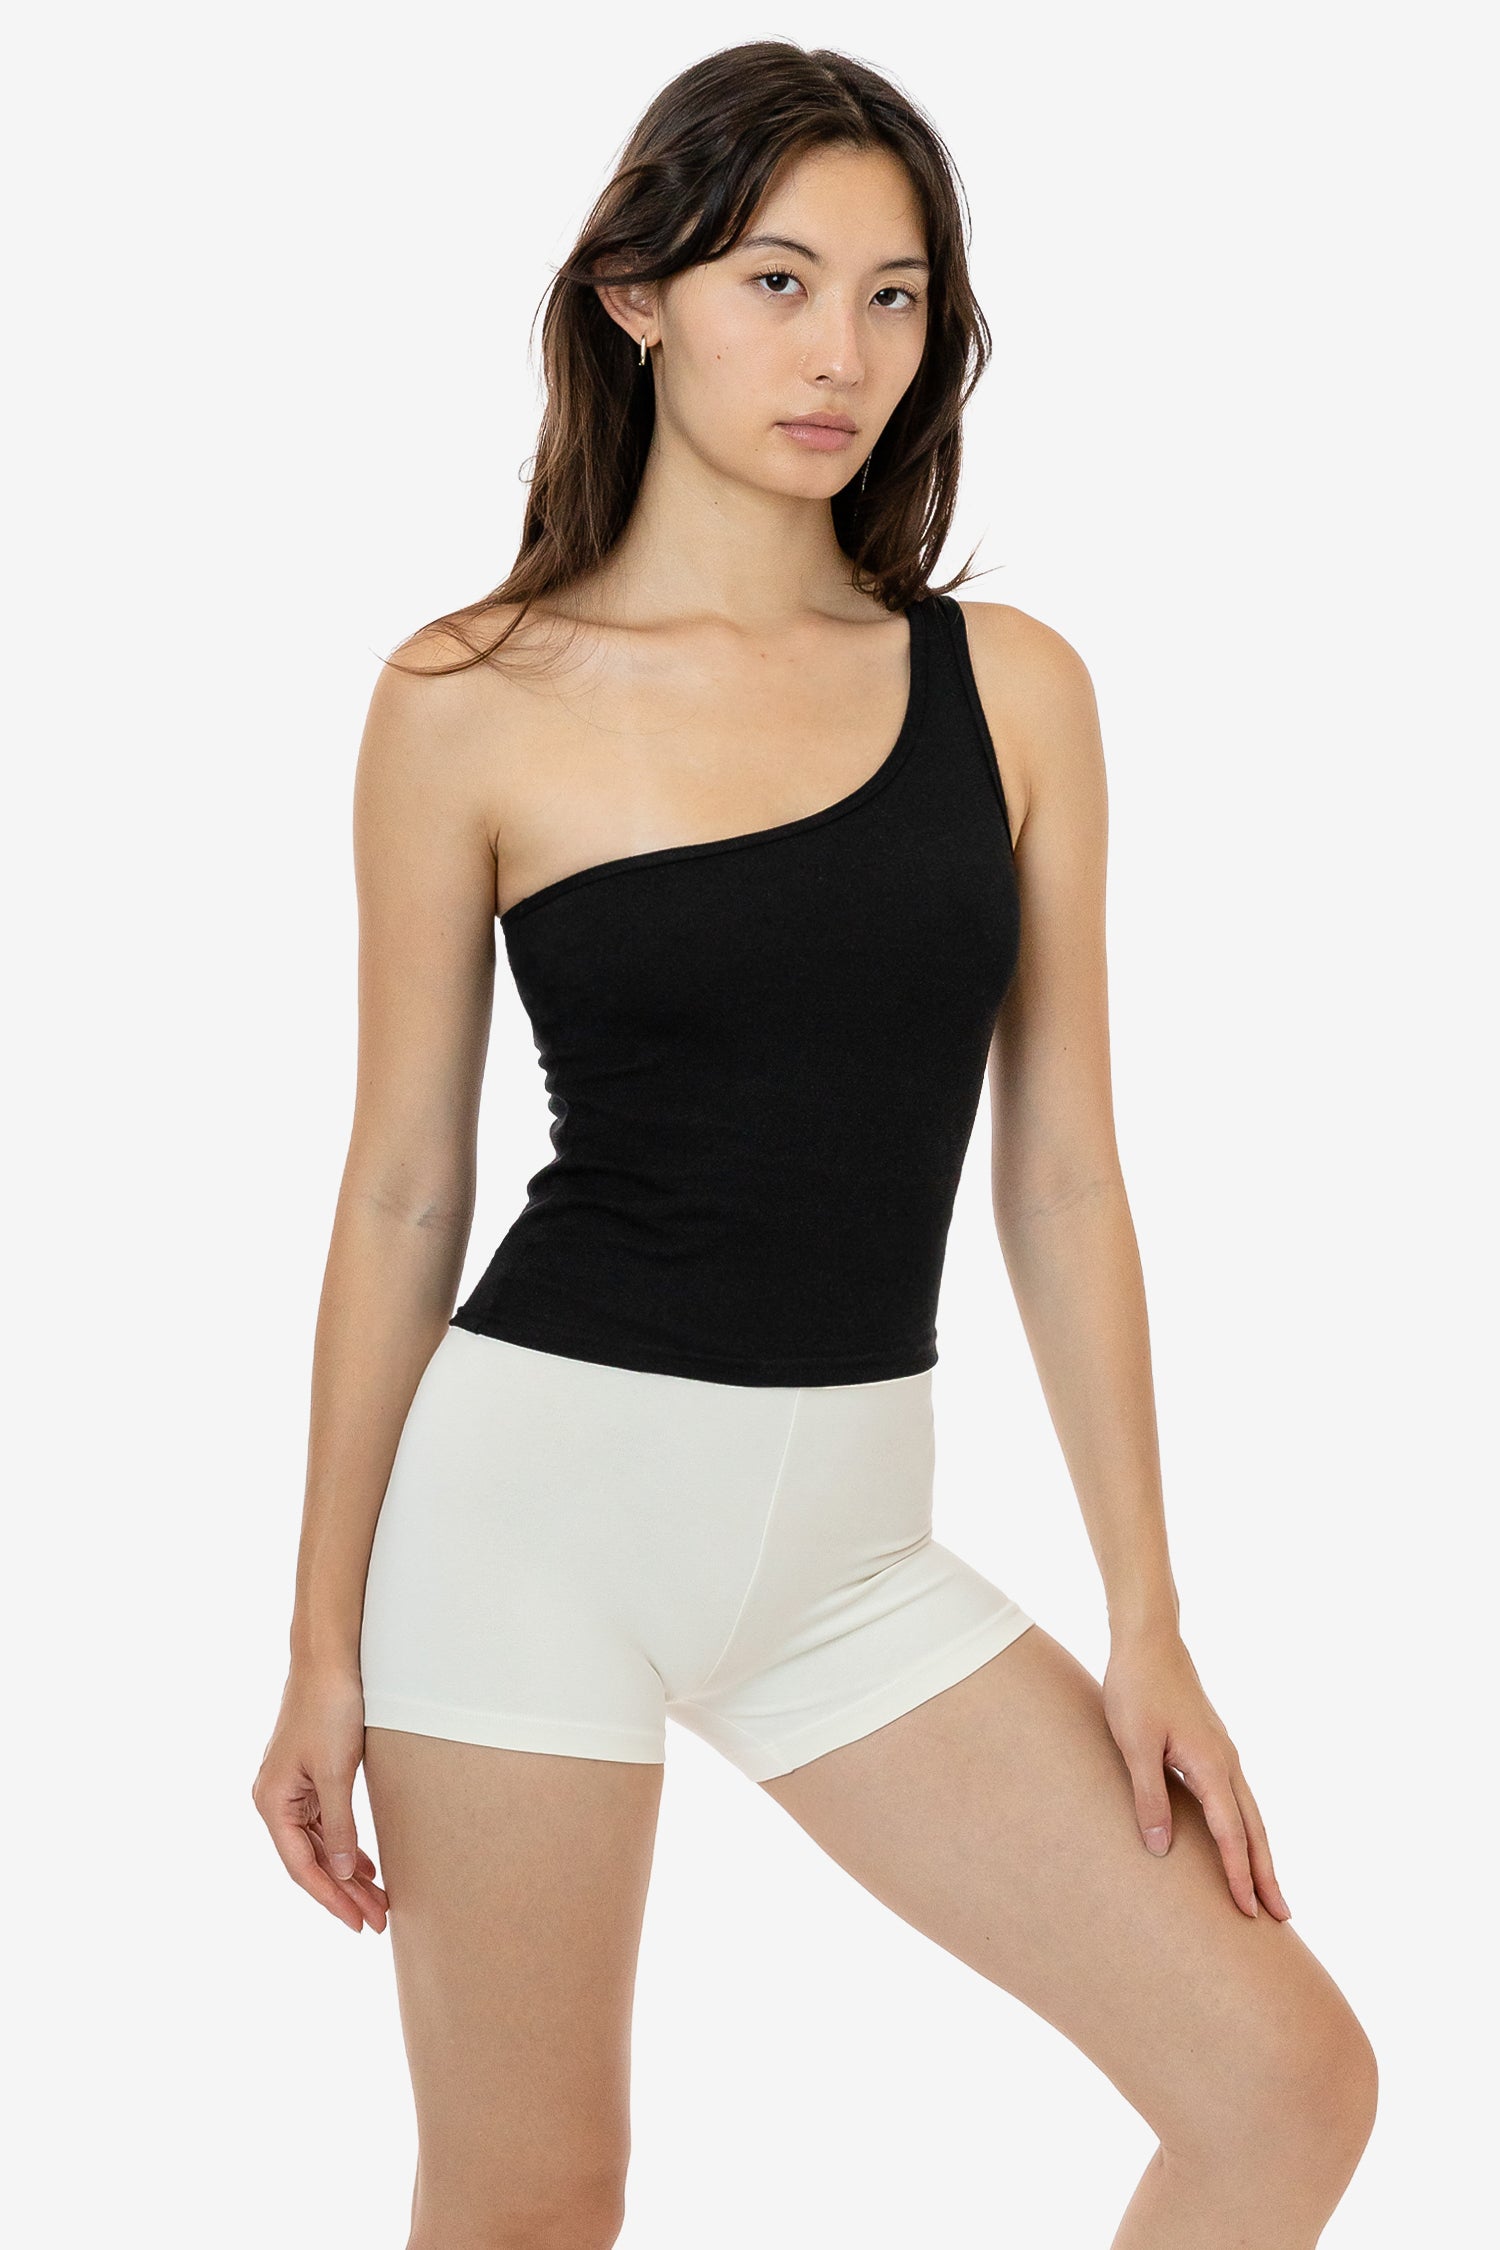 Los Angeles Apparel | Baby Rib One Shoulder Top for Women in White, Size Small